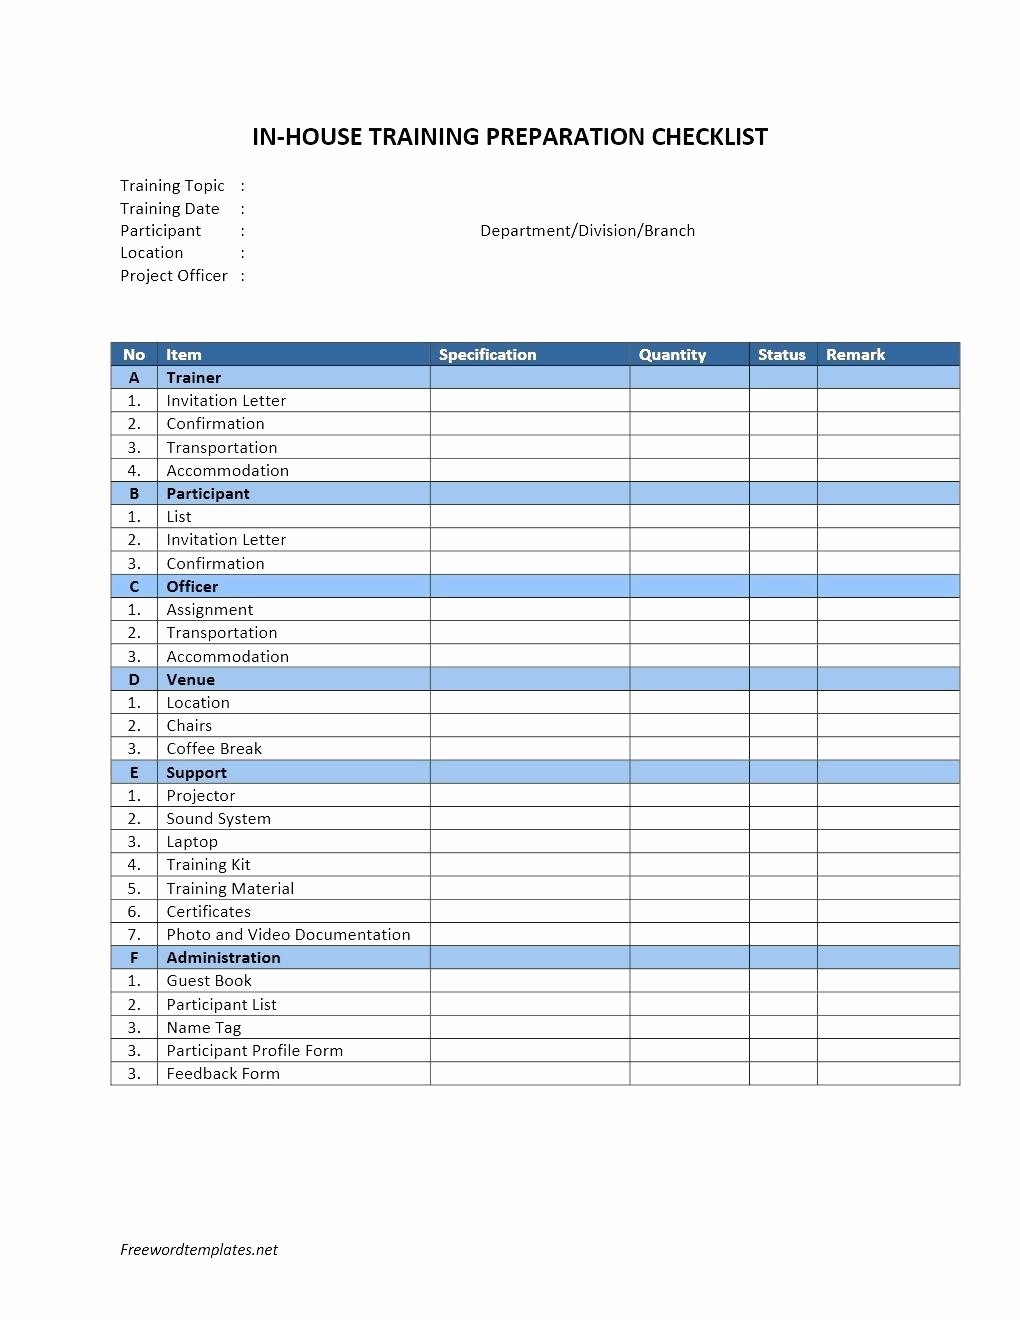 Free Editable Cleaning Schedule Template Unique Warehouse Cleaning Schedule Template Tierianhenry